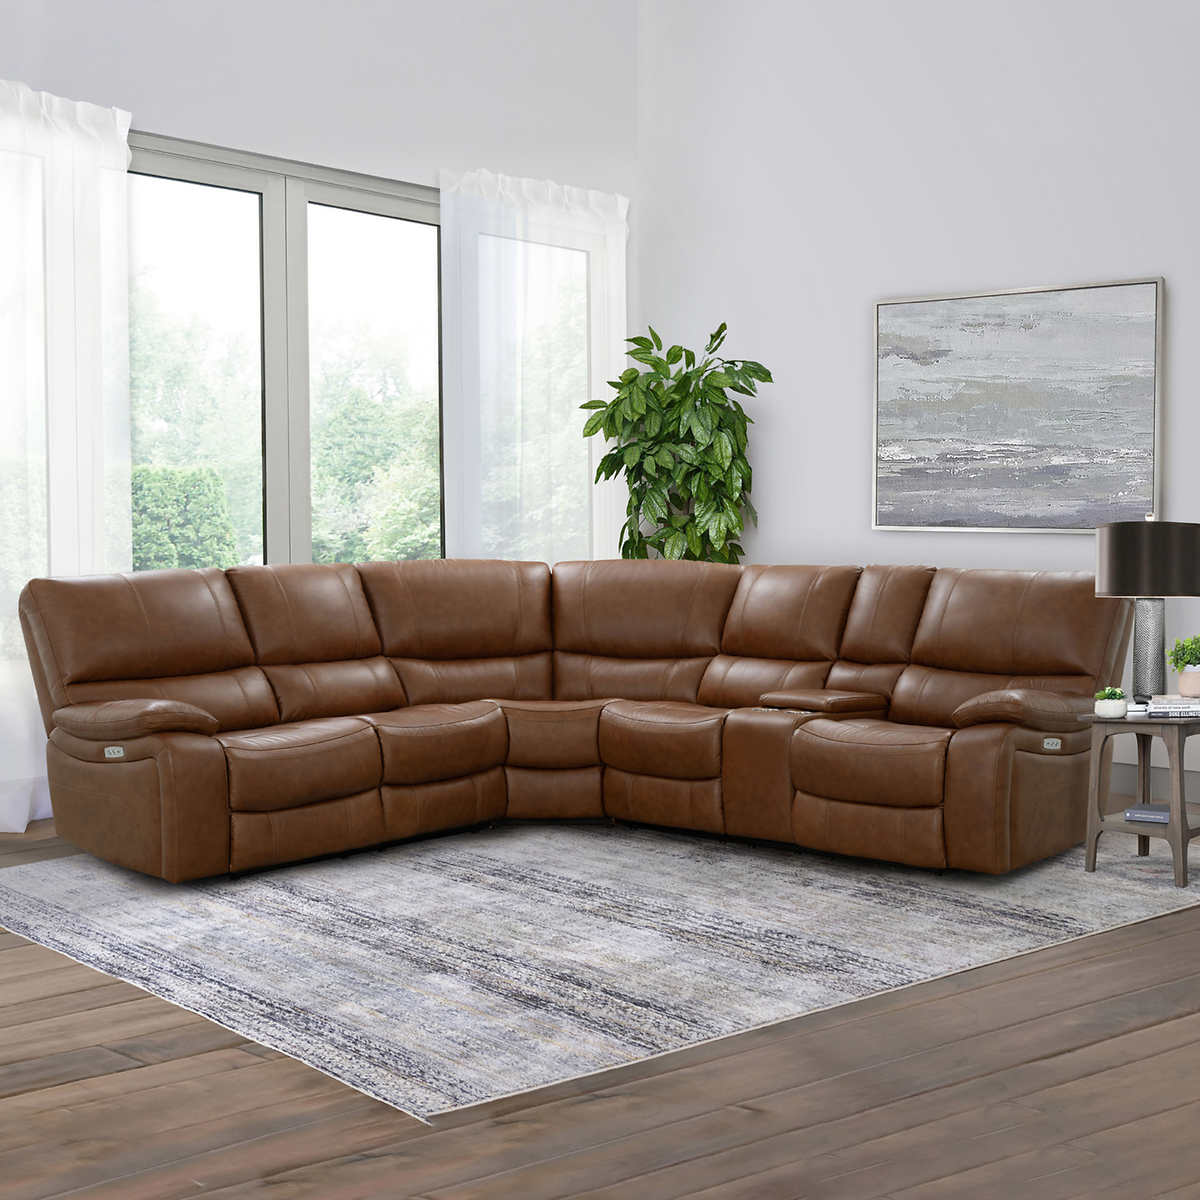 Braymor 3 Piece Top Grain Leather Power, Leather Sectional With Recliners